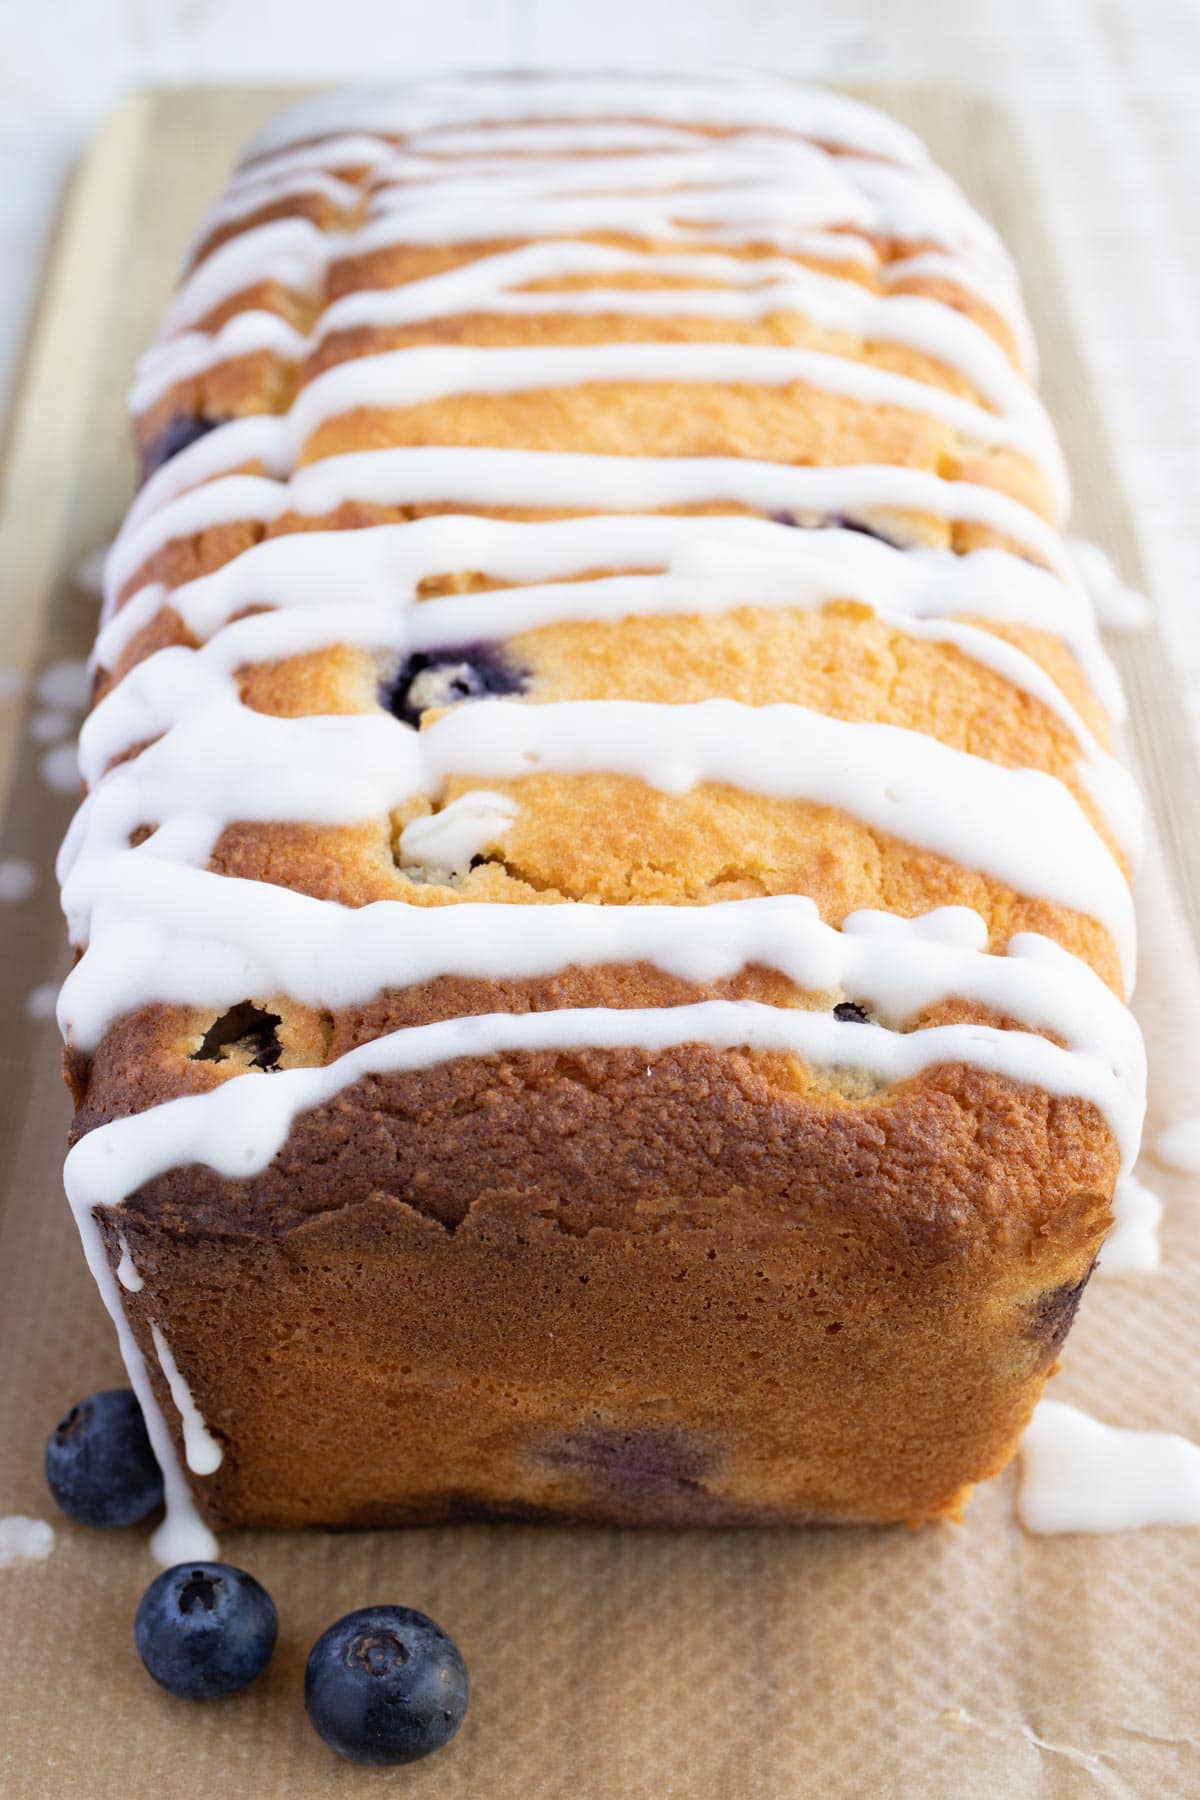 Blueberry loaf topped with sugar free lemon drizzle